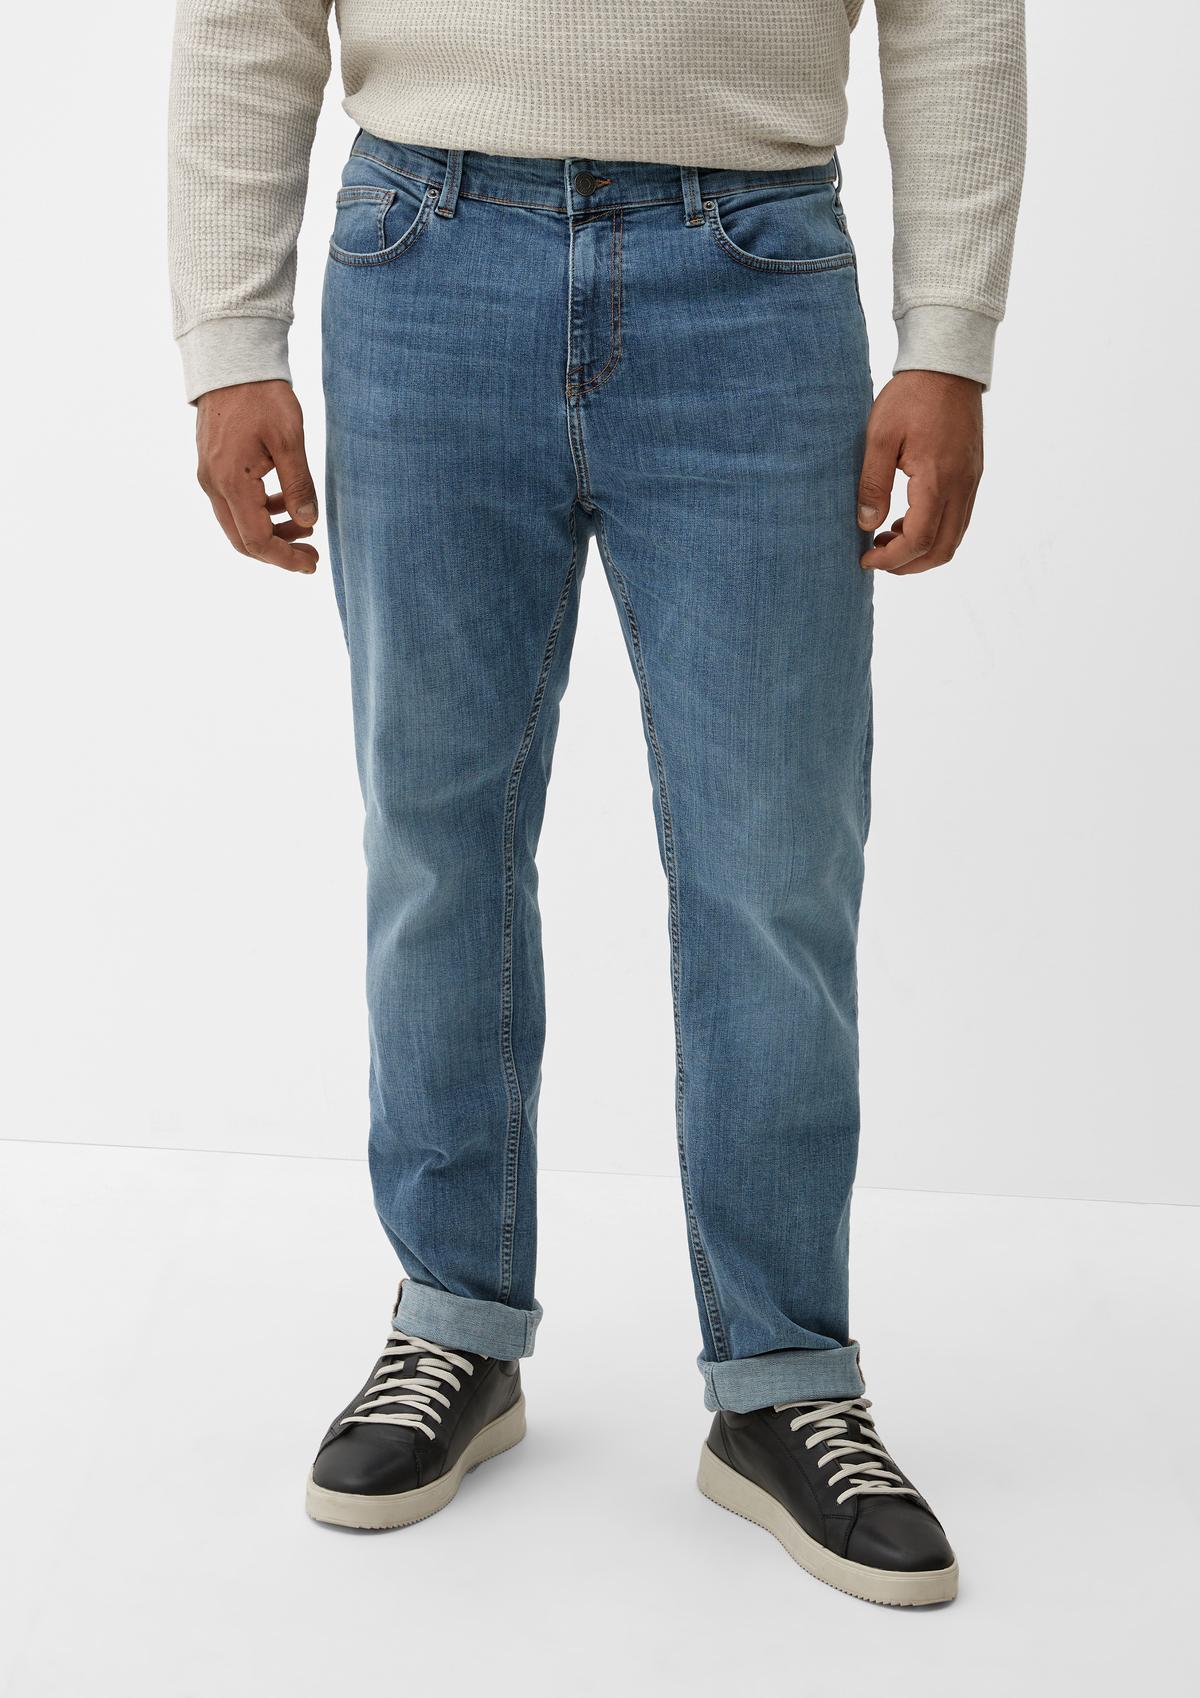 Casby jeans / relaxed fit / mid rise / straight leg